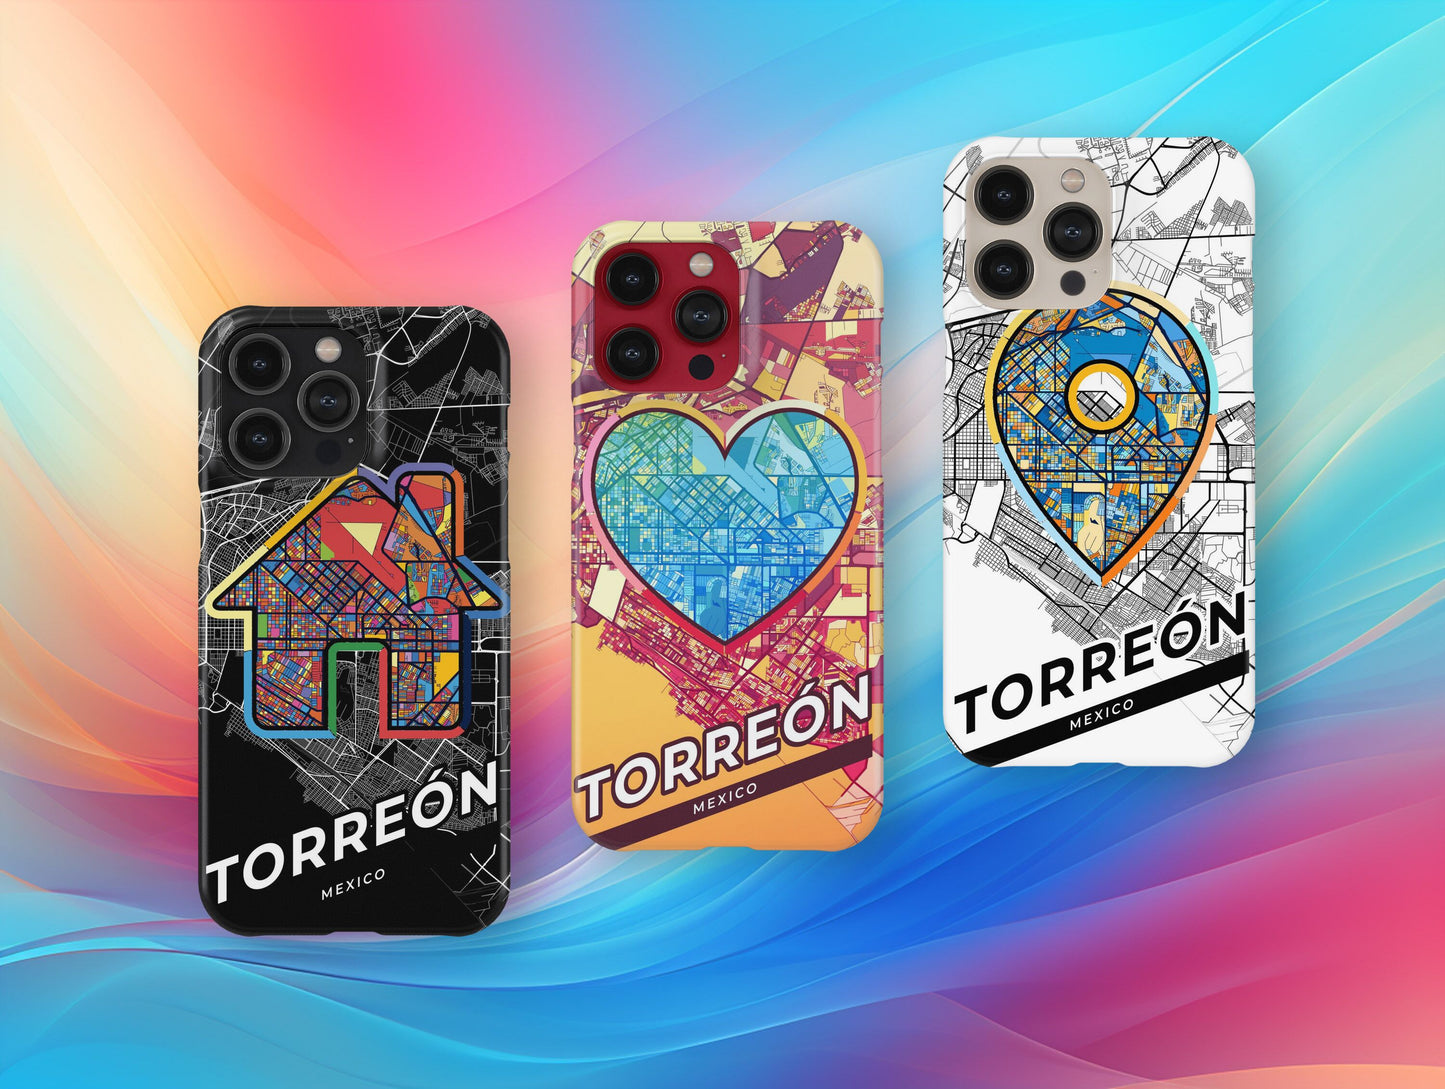 Torreón Mexico slim phone case with colorful icon